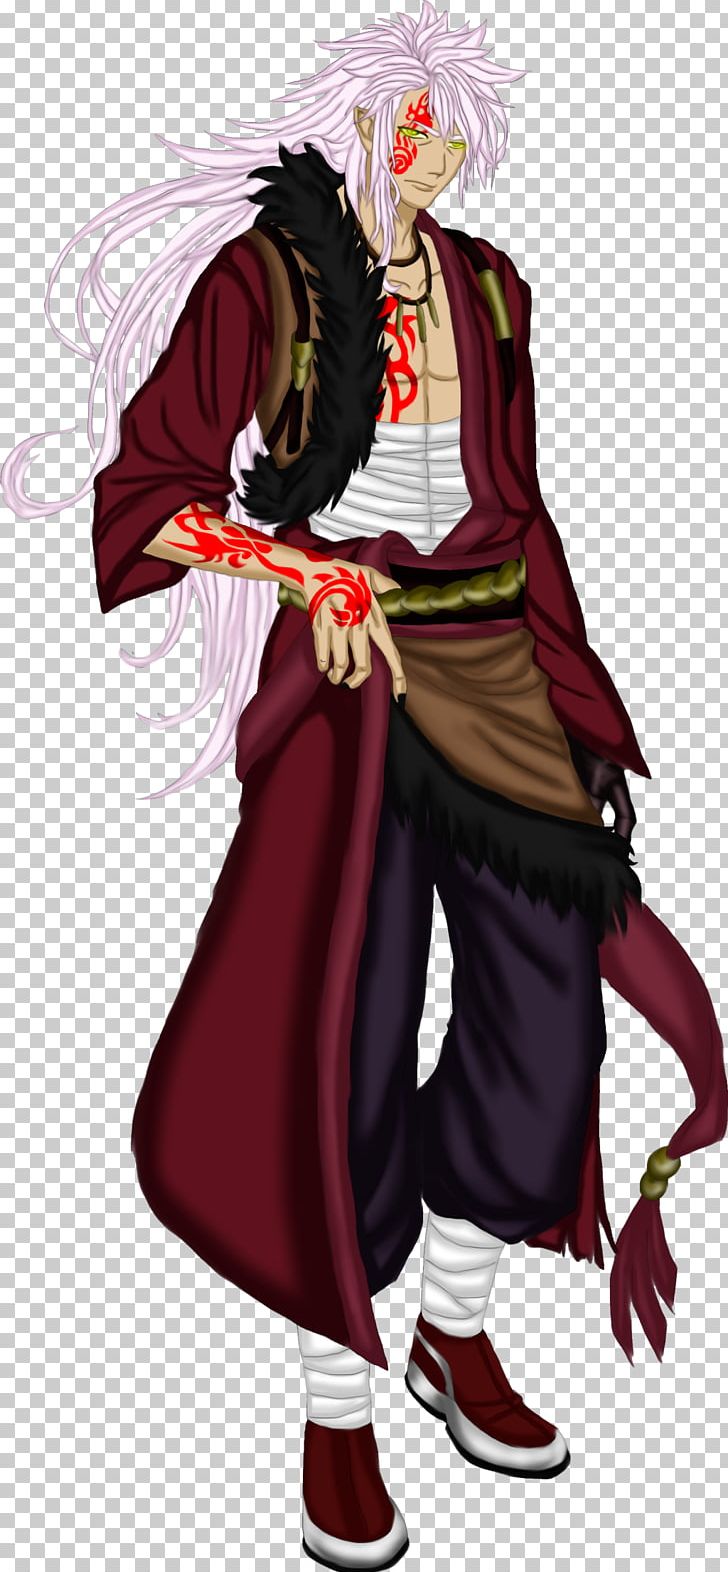 Hades Deity God Fairy Tail Male PNG, Clipart, Anime, Blair, Costume, Costume Design, Deity Free PNG Download